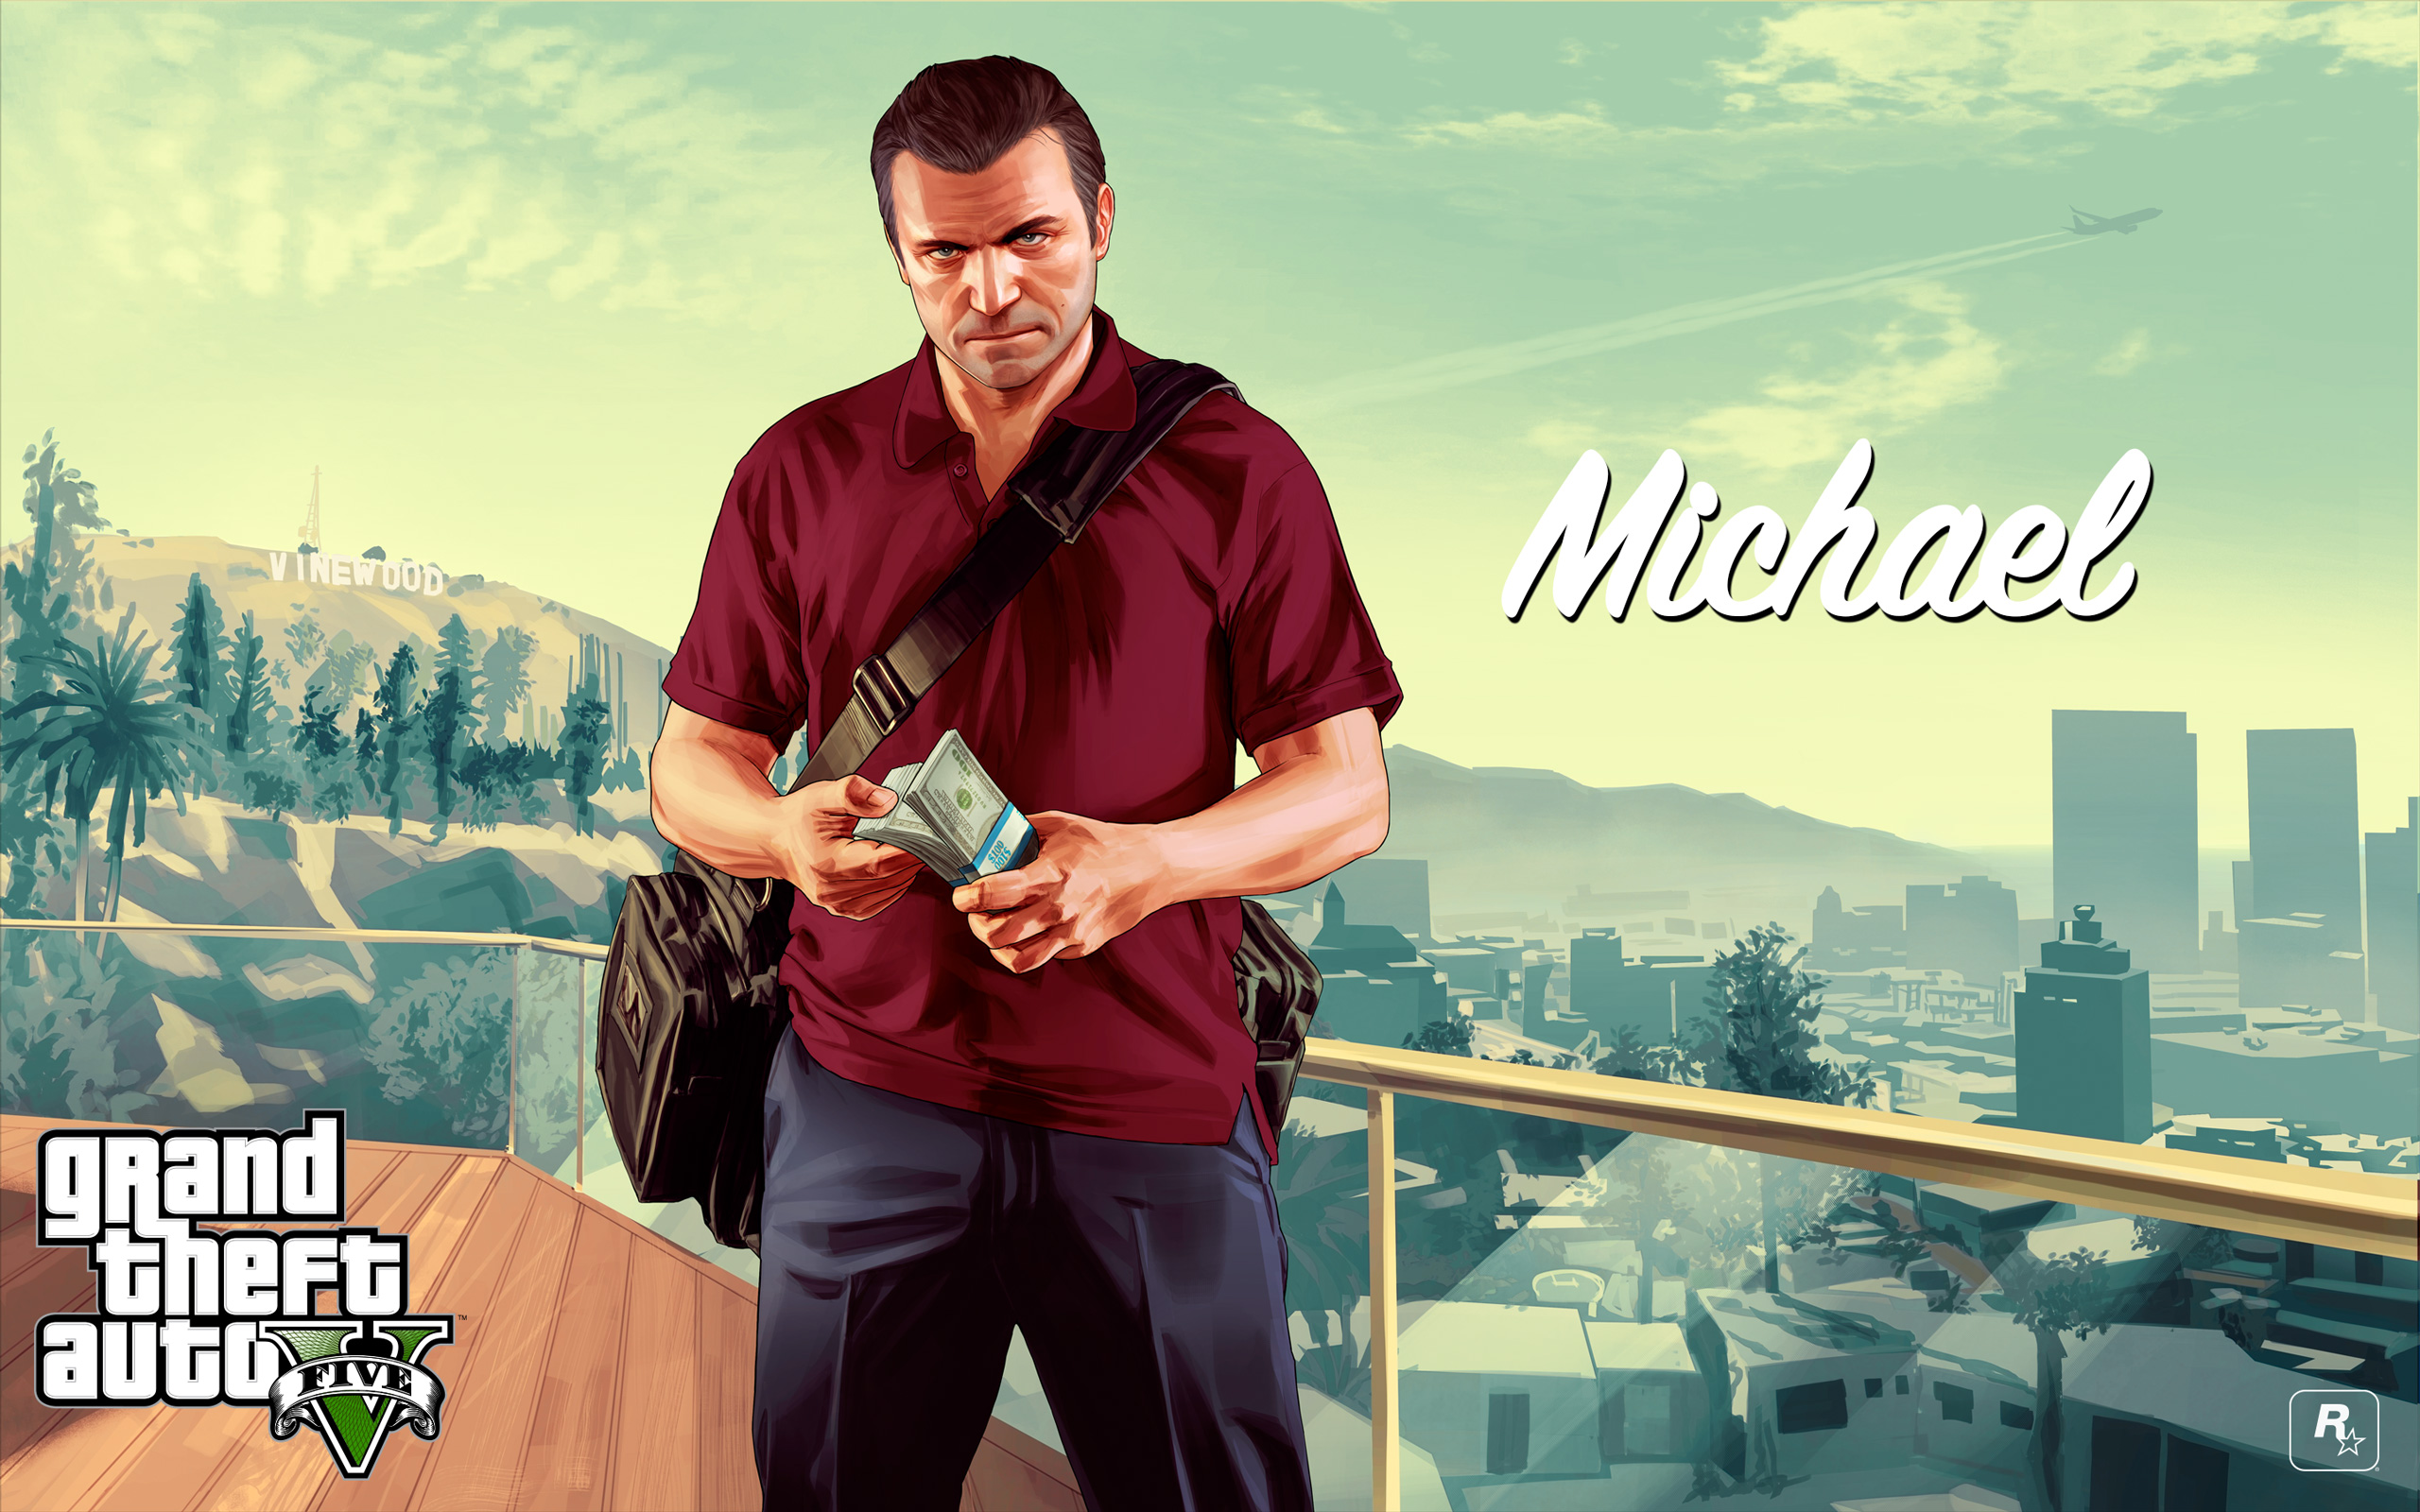 grand theft auto 5 wallpapers